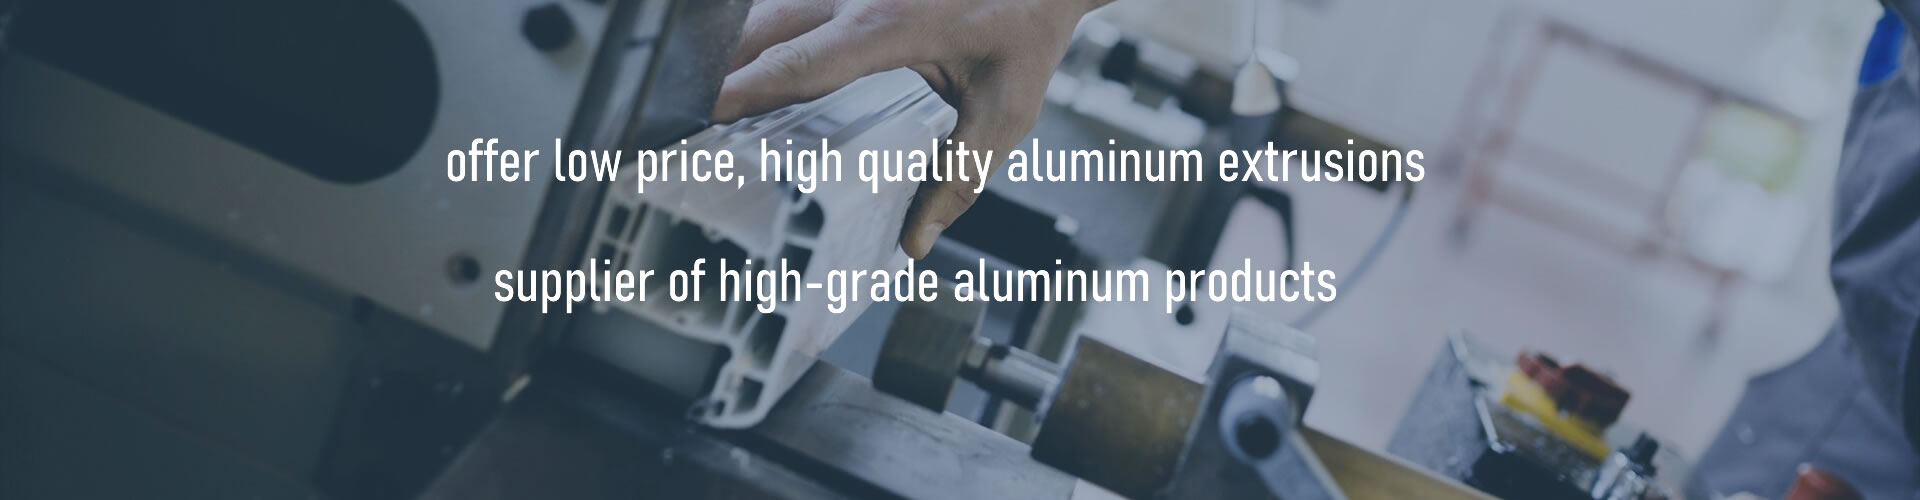 offer low price, high quality aluminum extrusions.